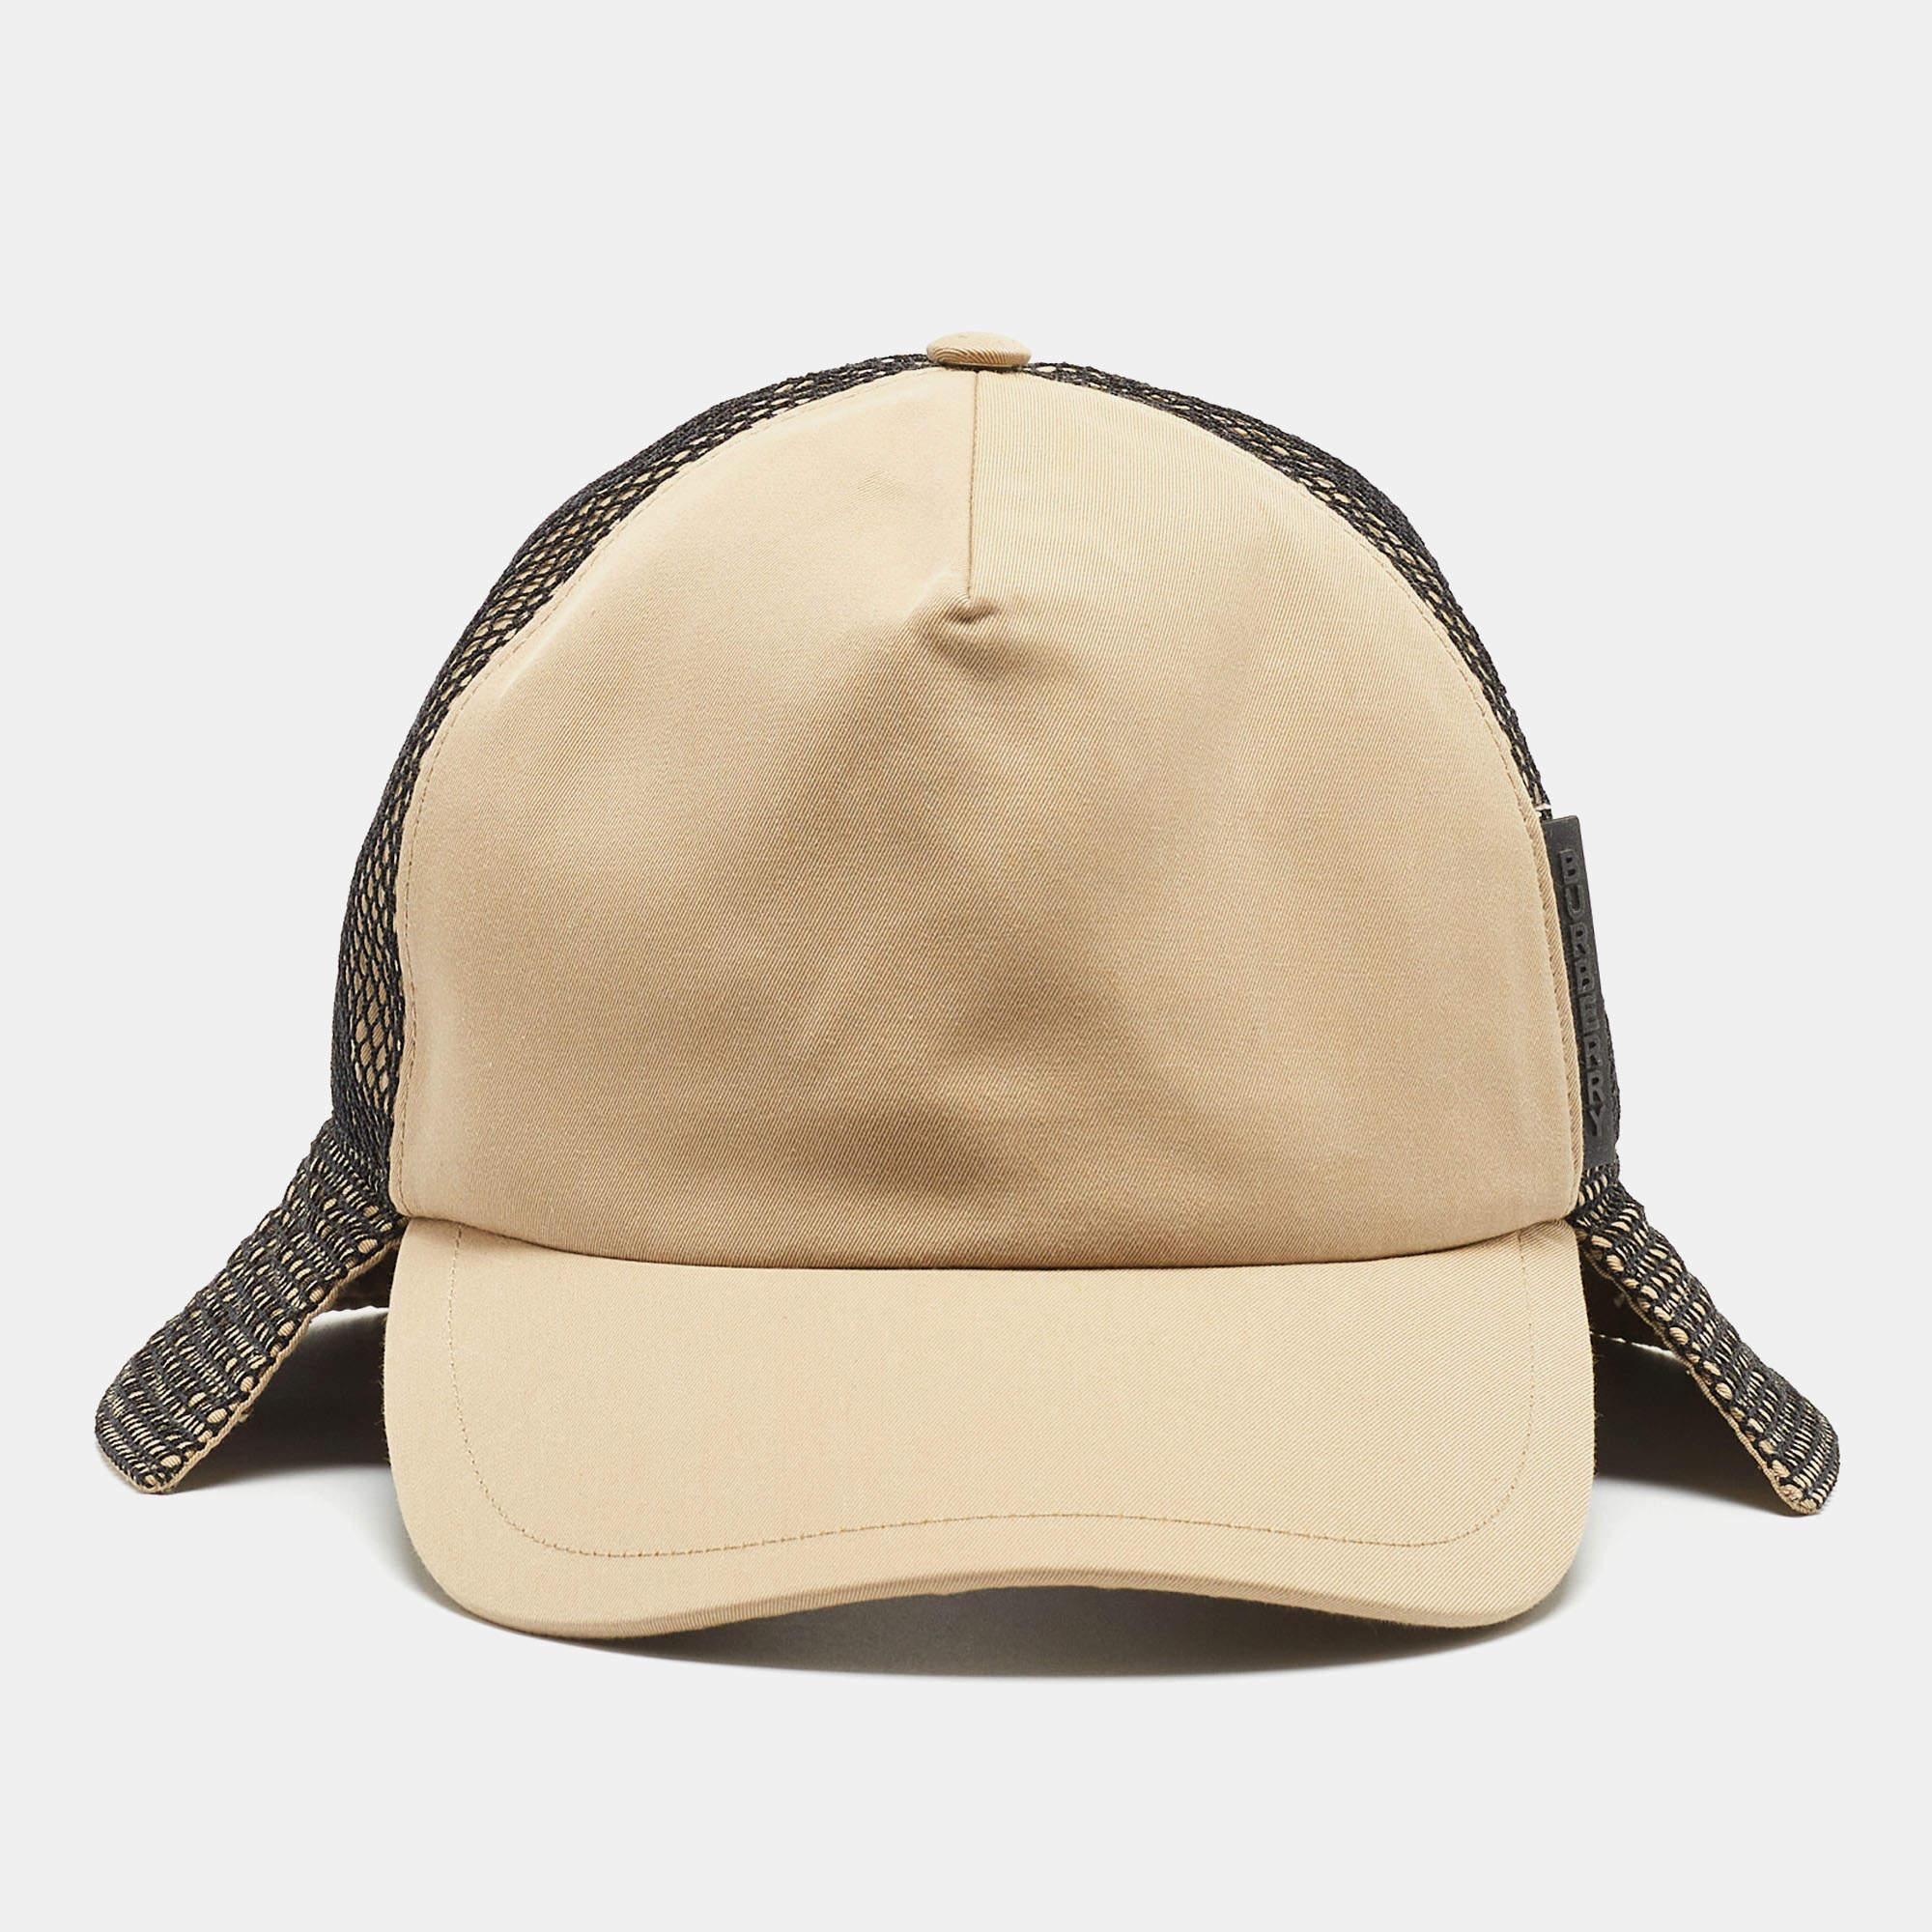 The Burberry hat combines classic elegance with contemporary flair. Crafted from premium beige cotton, it features a mesh panel for breathability. This hat is a versatile accessory, blending style and functionality effortlessly.

Includes: Price Tag